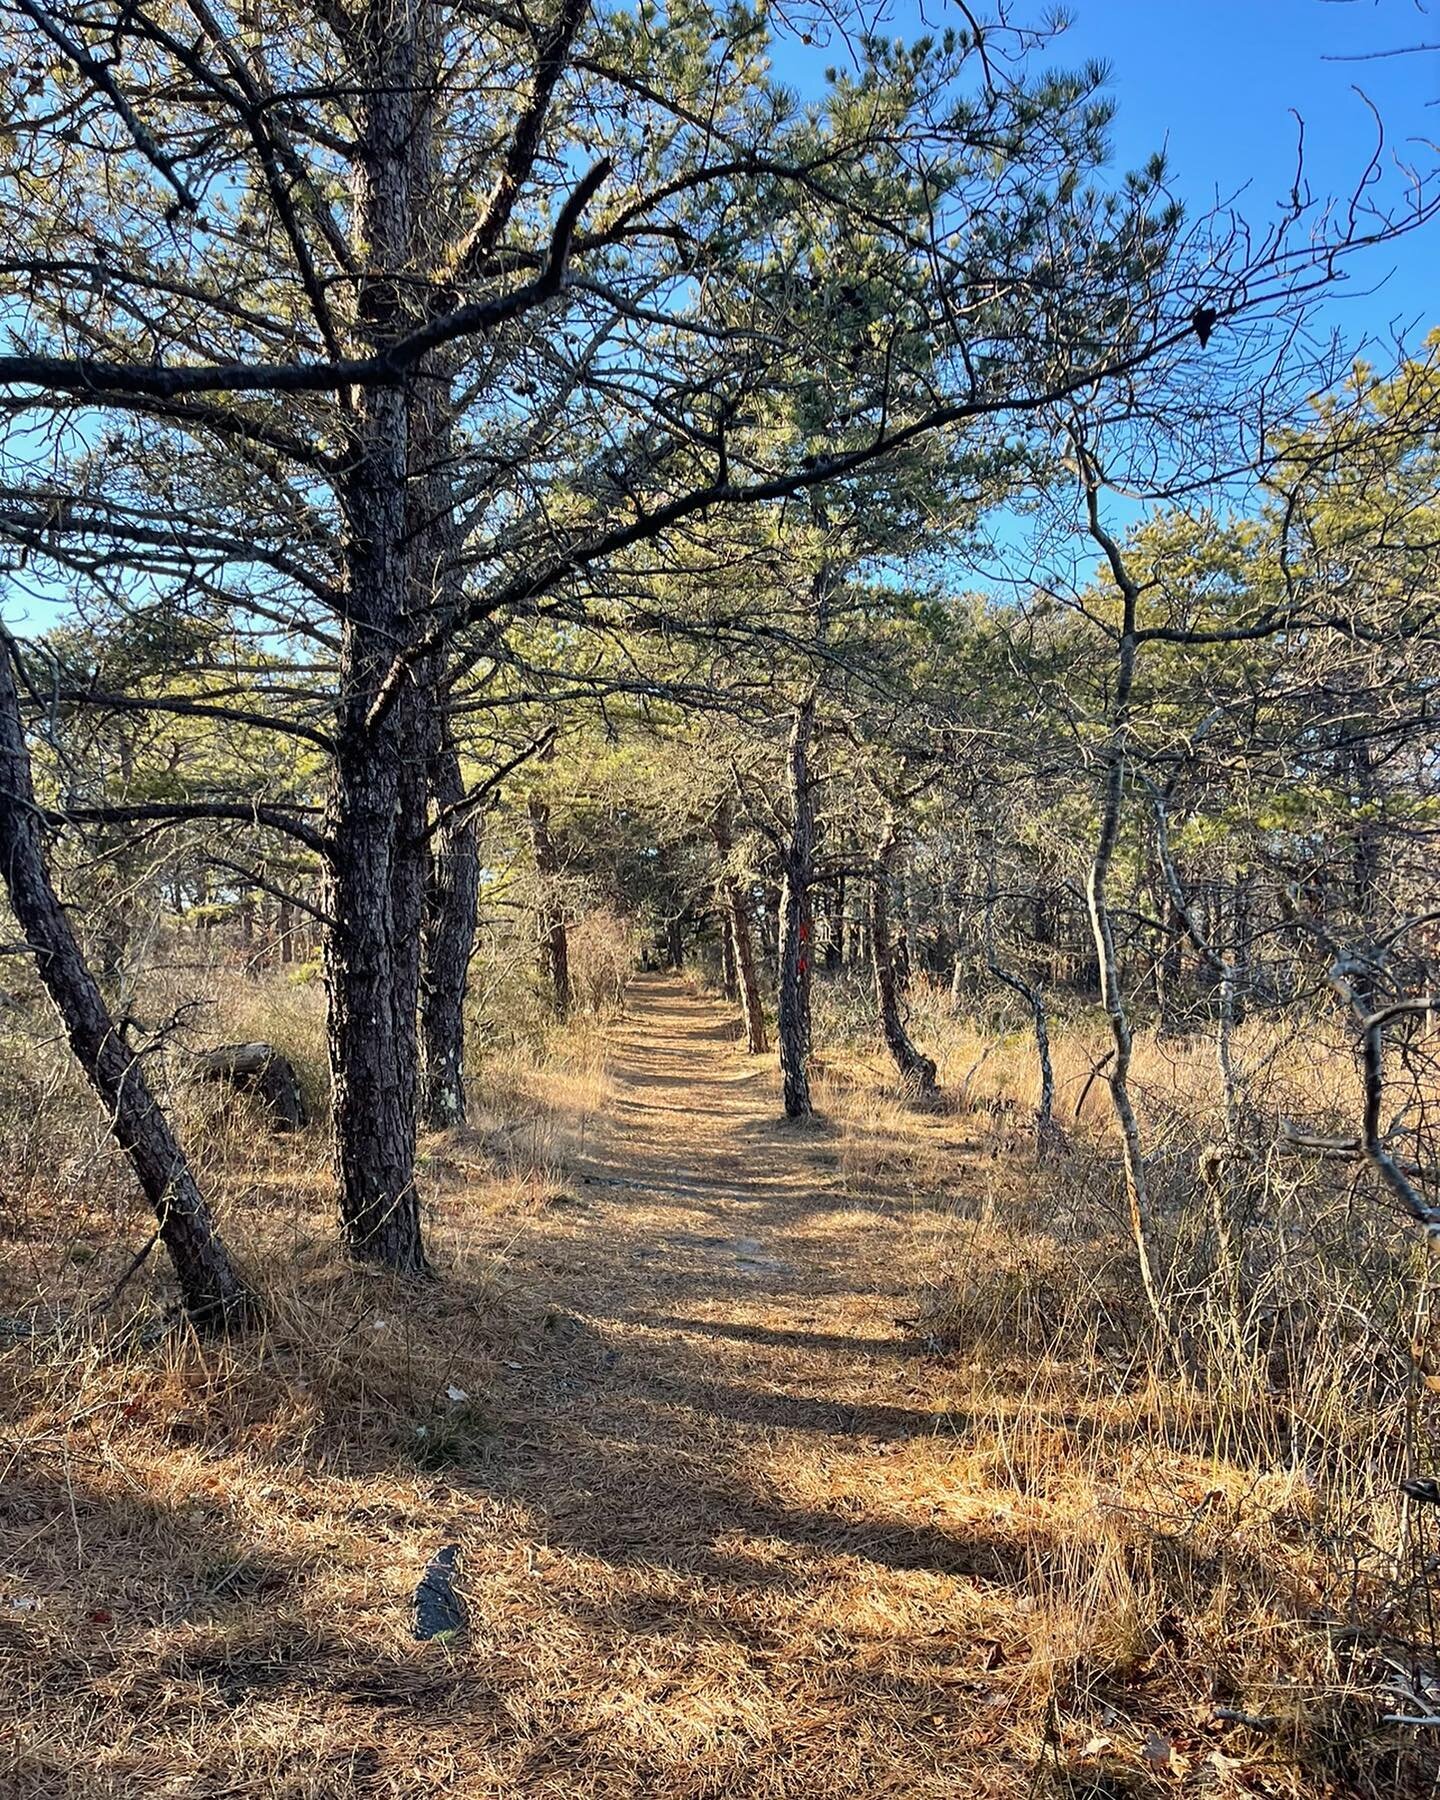 SATURDAY, APRIL 22, 2023 - 10:00 AM - PAUMANOK PATH THRU NAPEAGUE PINES HIKE

Join us for what could be an eye-opening hike. What was until recently the beautiful Pitch Pine woods of Napeague is now being devastated by the Southern pine beetle. We wi